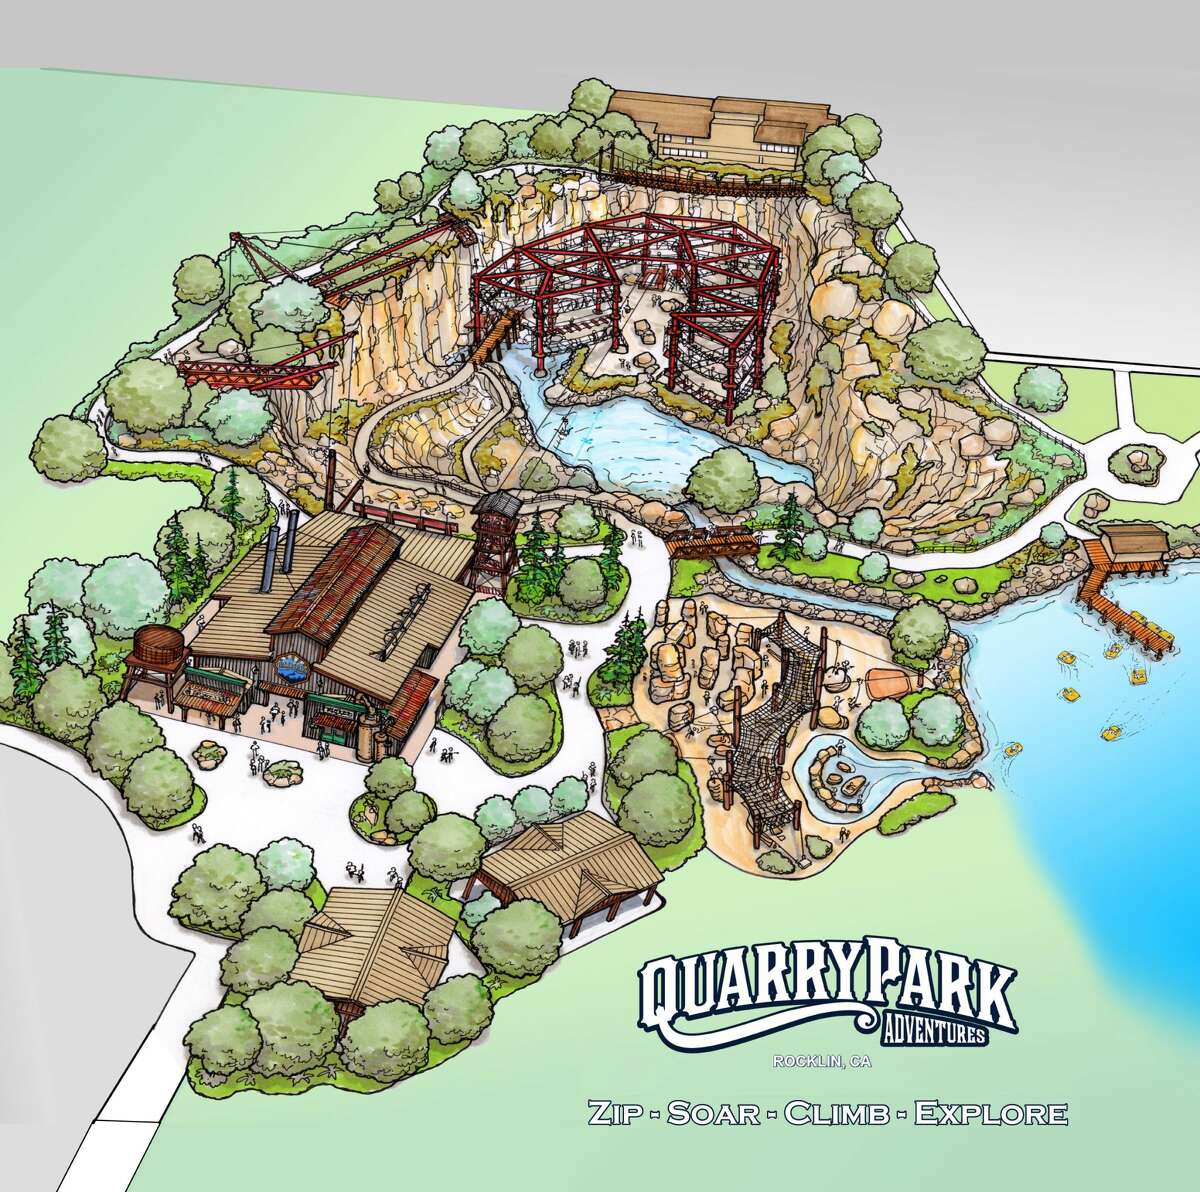 Quarry Park, a new themed attraction opening in Rocklin this year offers zip lines, a ropes course, and rock climbing activities, among other things.